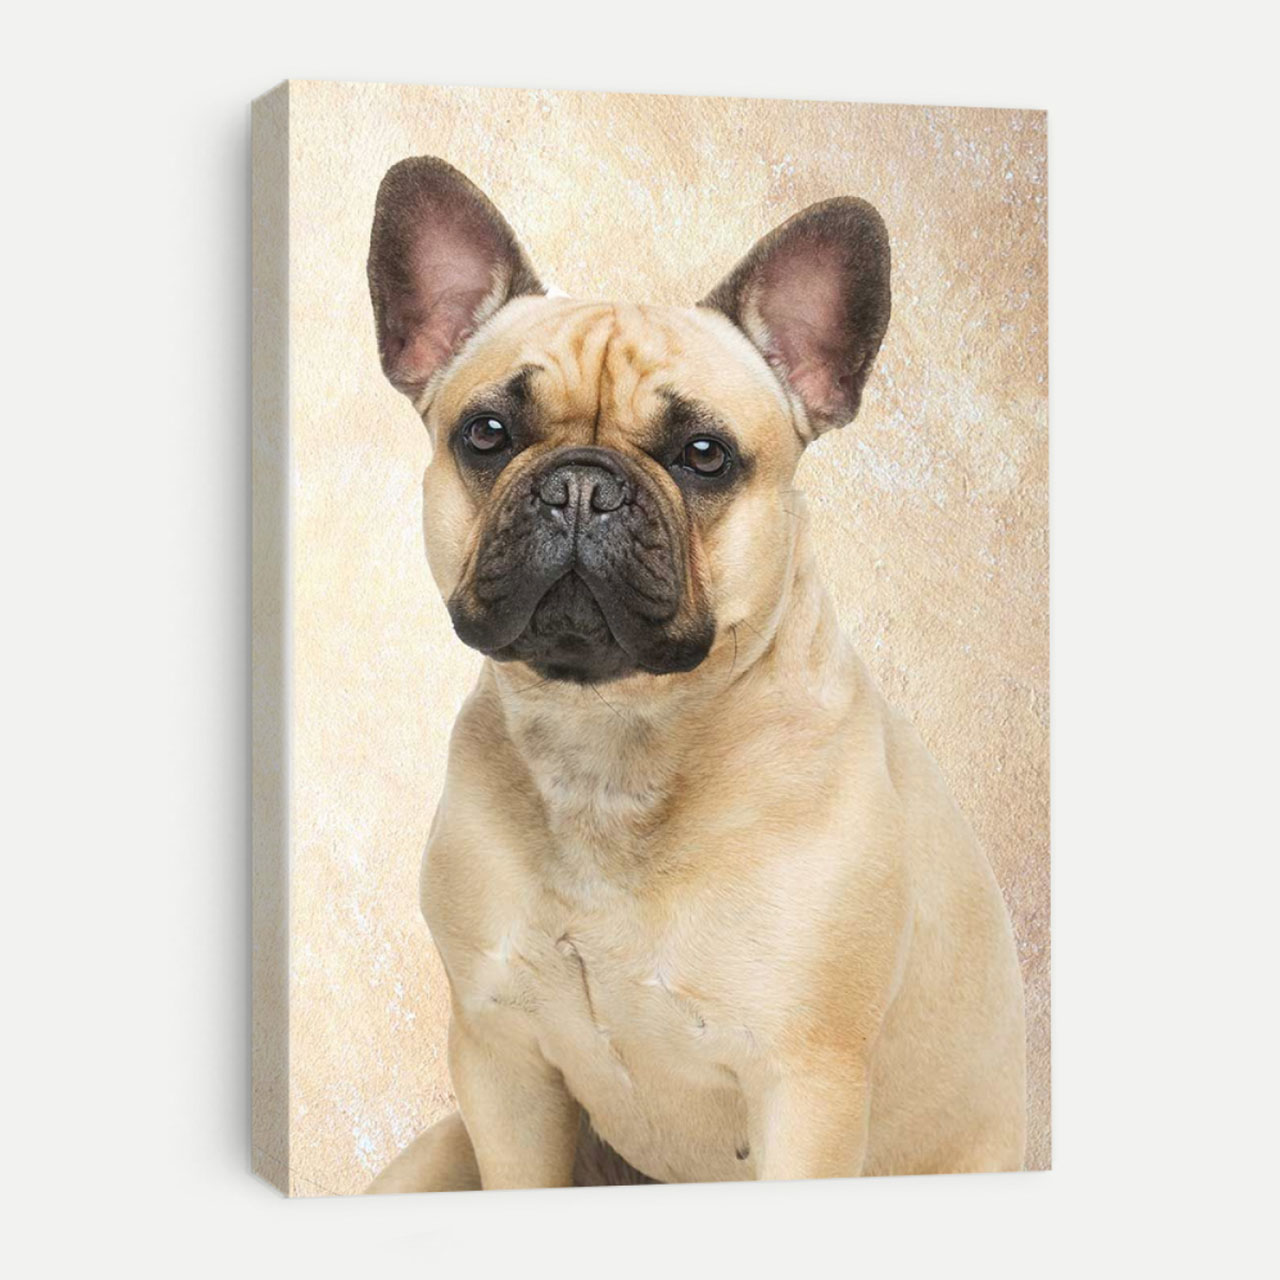 A canvas print displaying a photo of a French Bulldog